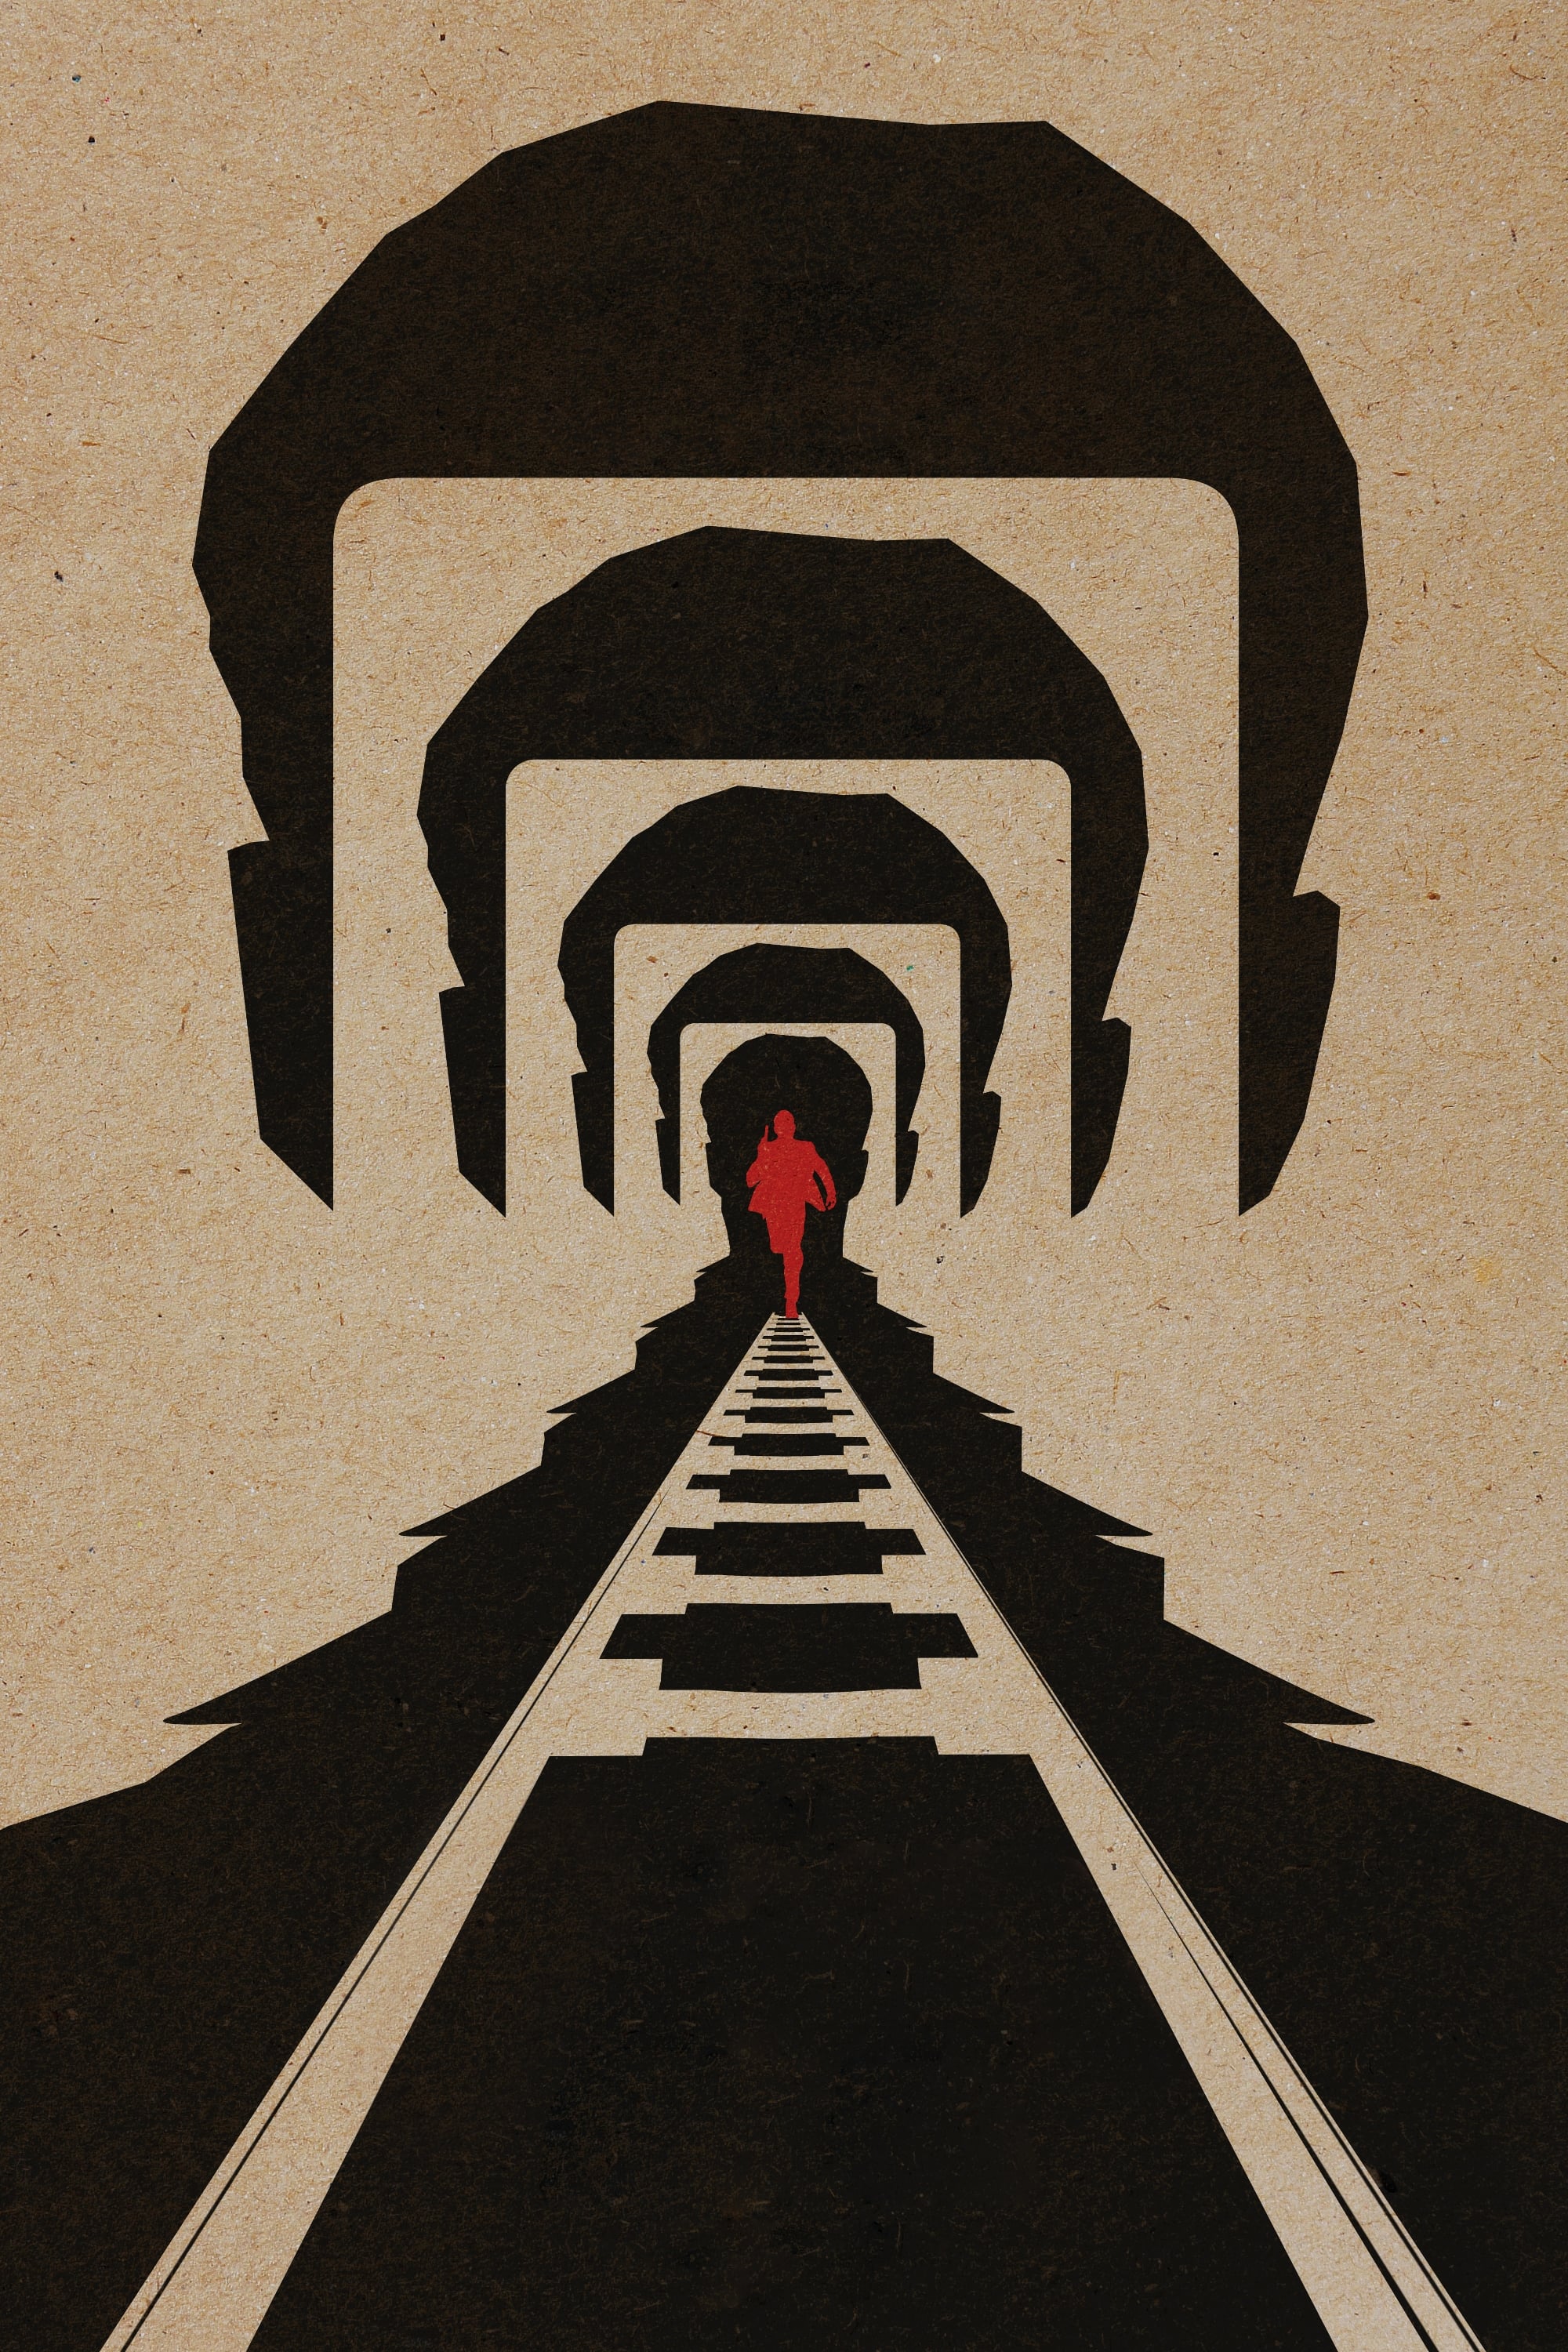 The Commuter POSTER